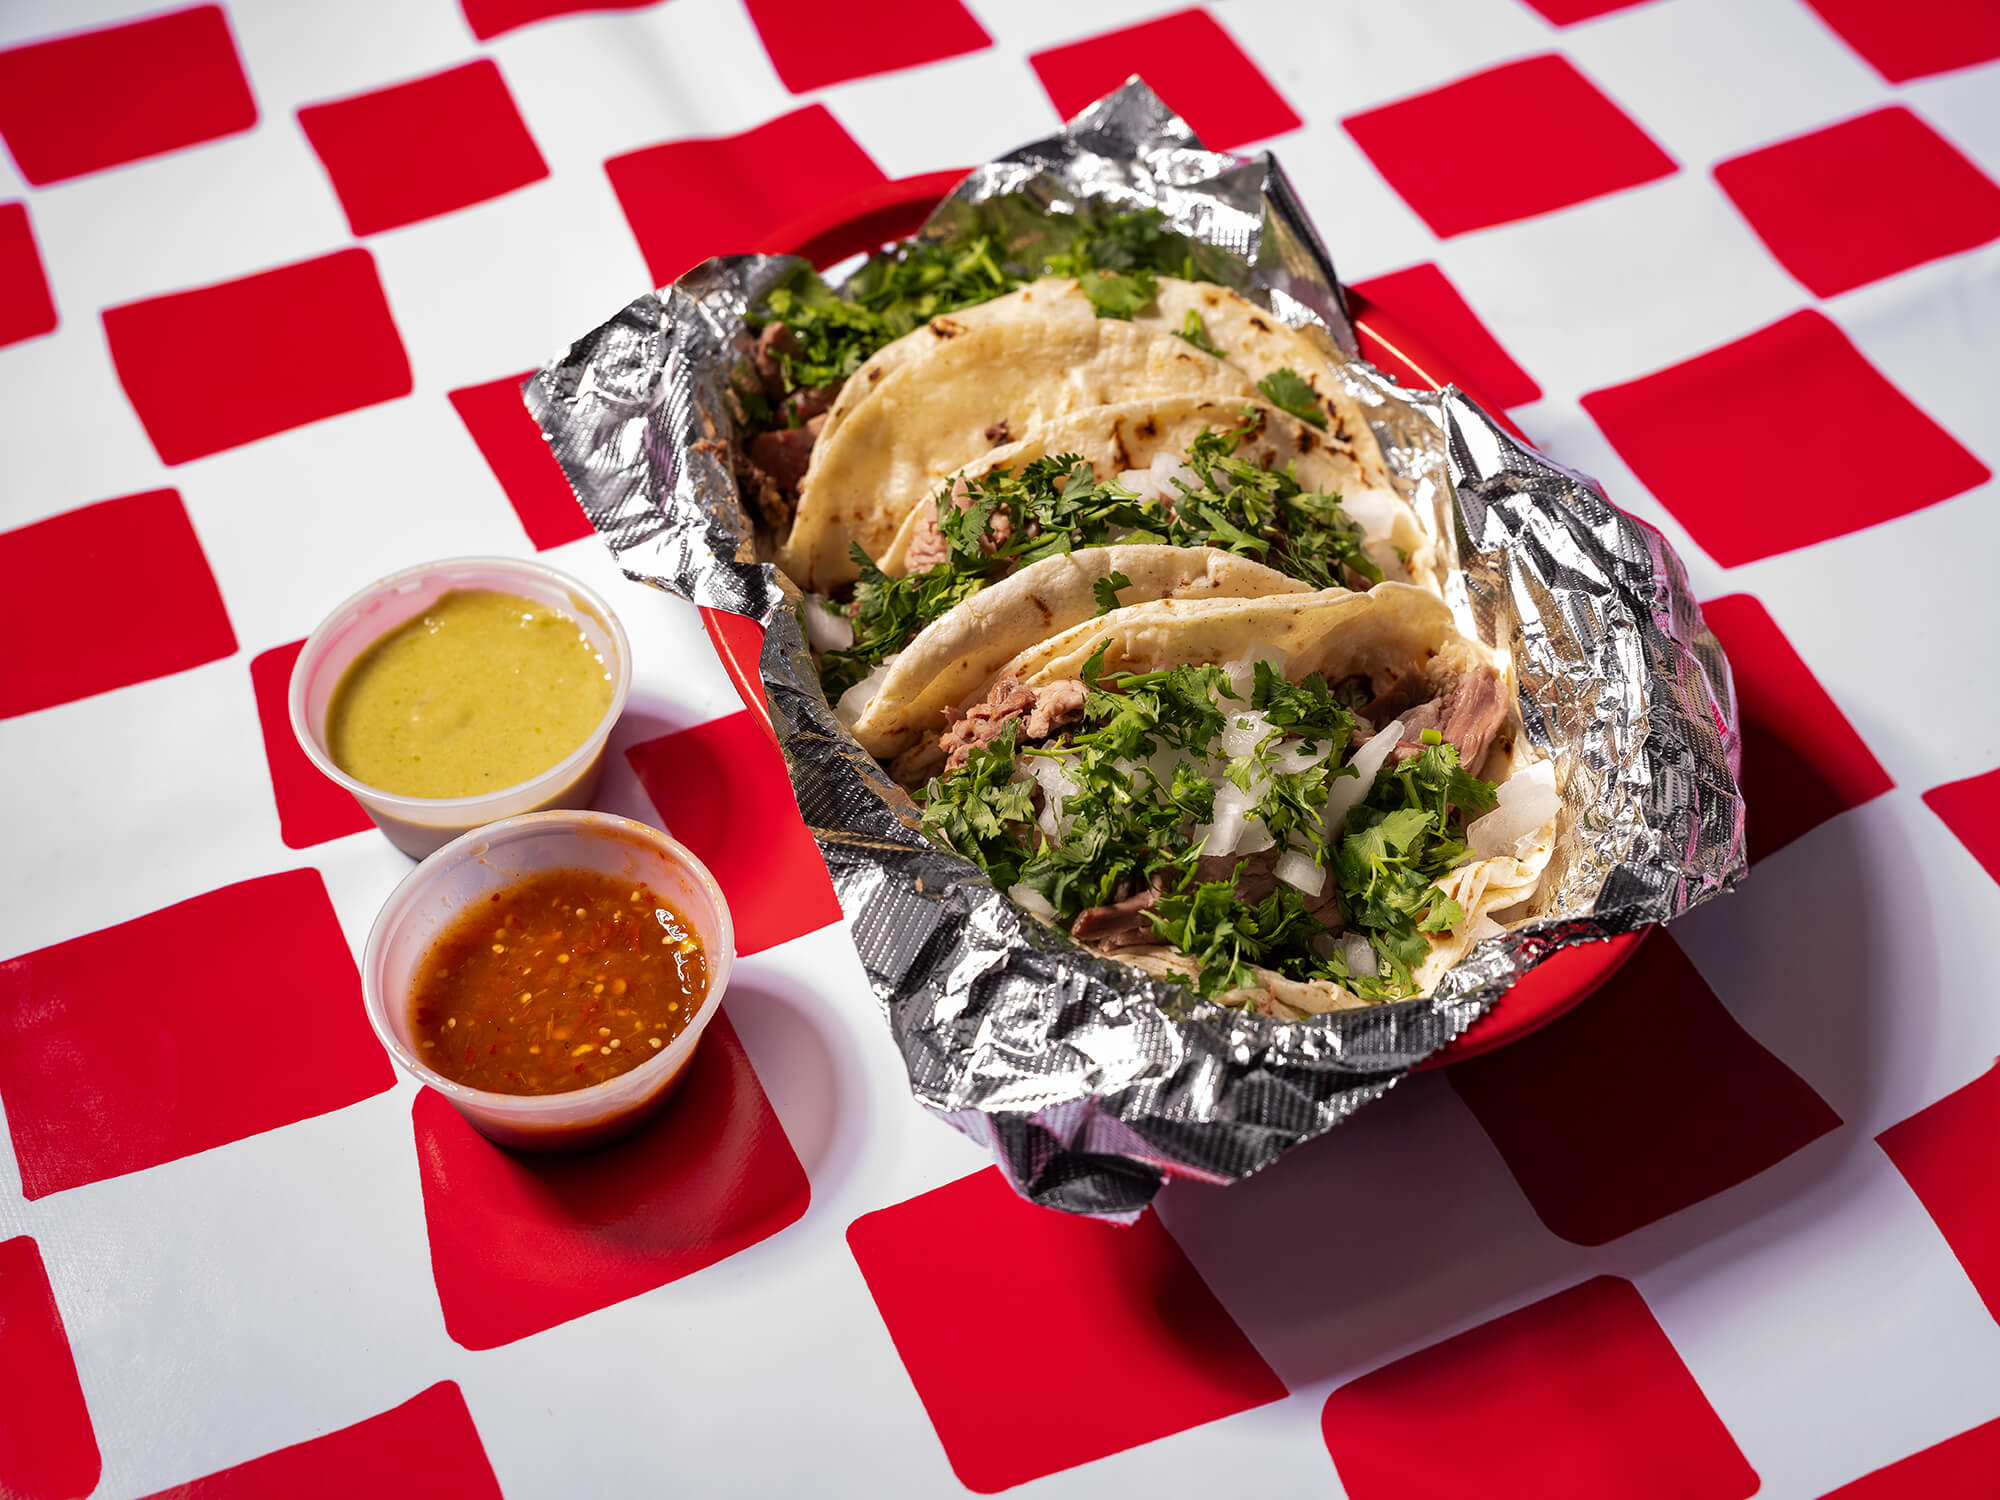 A basket of barbacoa tacos topped with onion and cilantro on a red-and-white checkered tablecloth